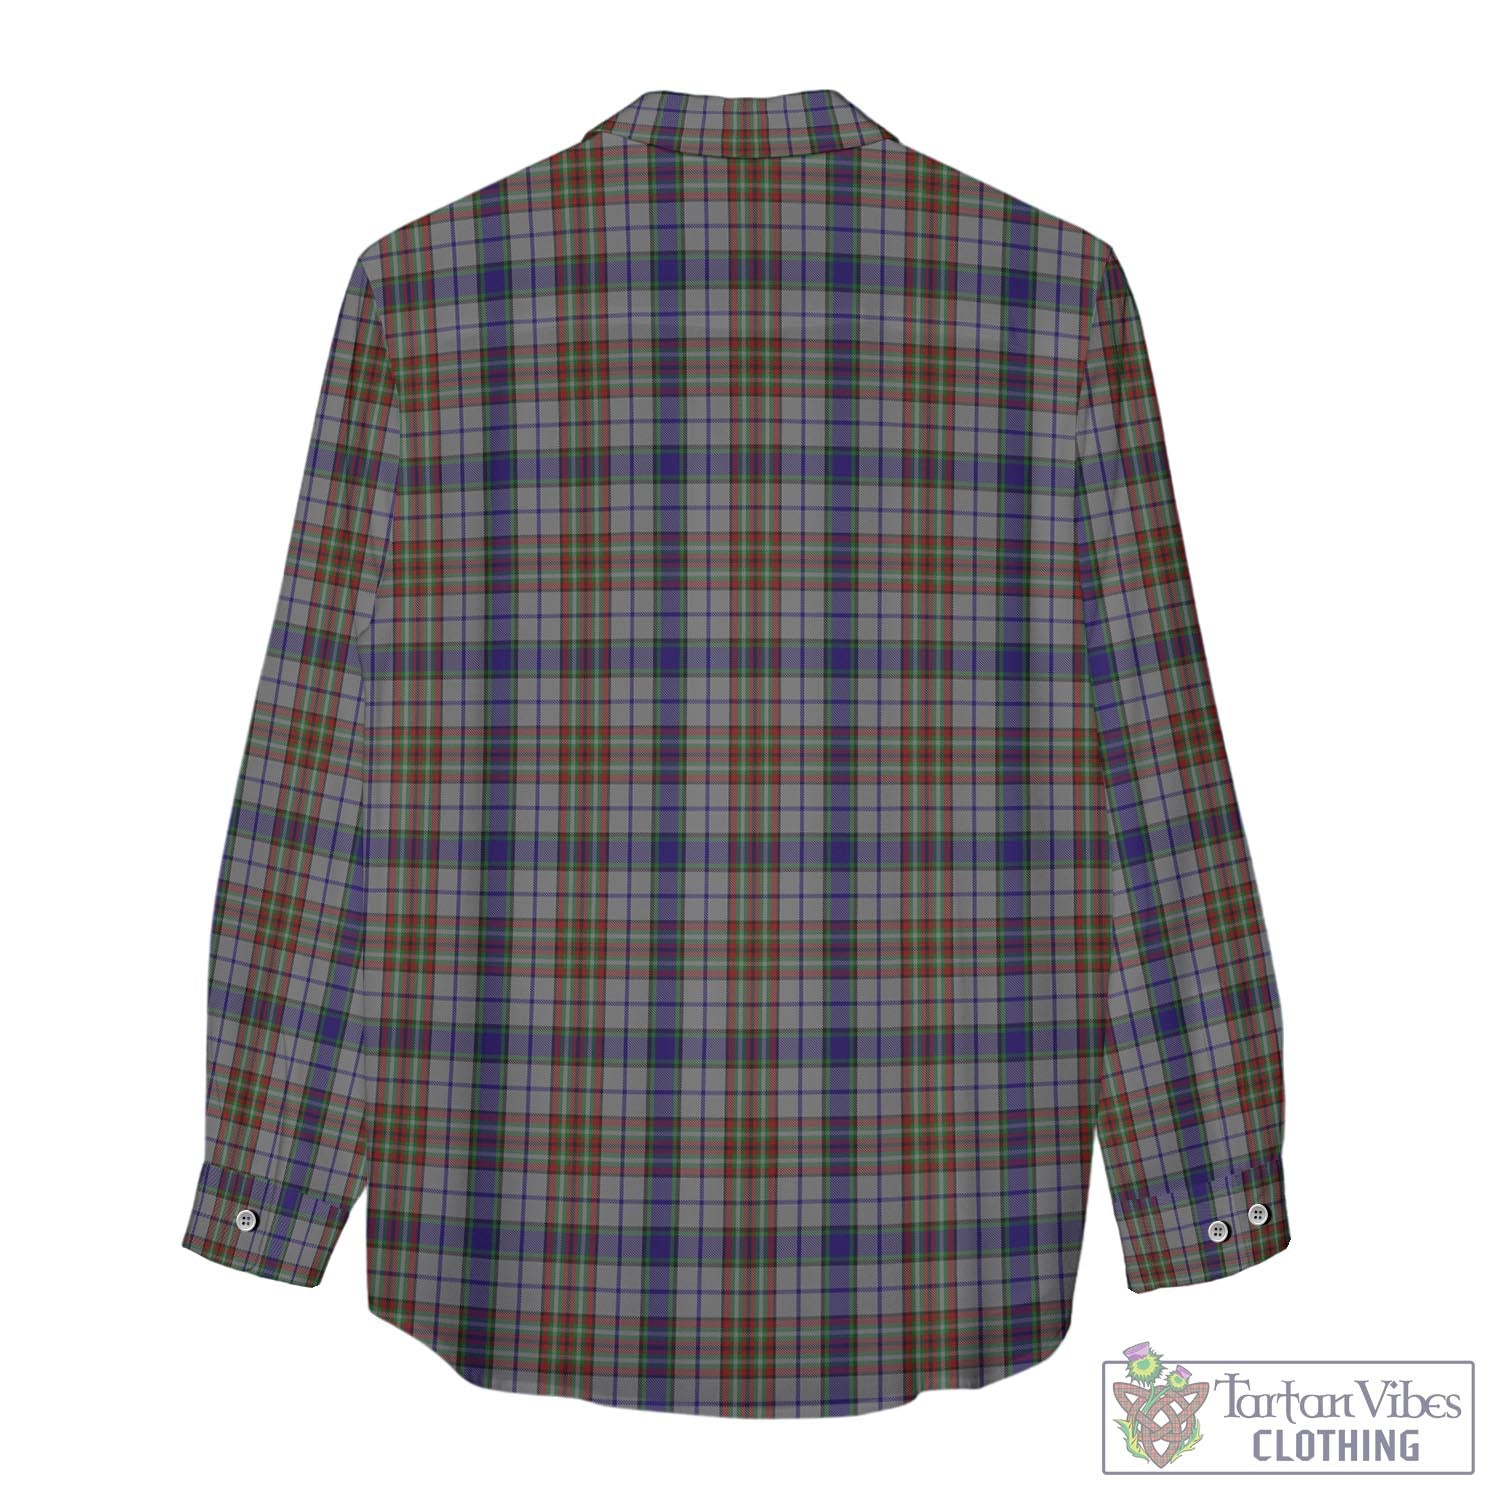 Tartan Vibes Clothing Gayre Hunting Tartan Womens Casual Shirt with Family Crest